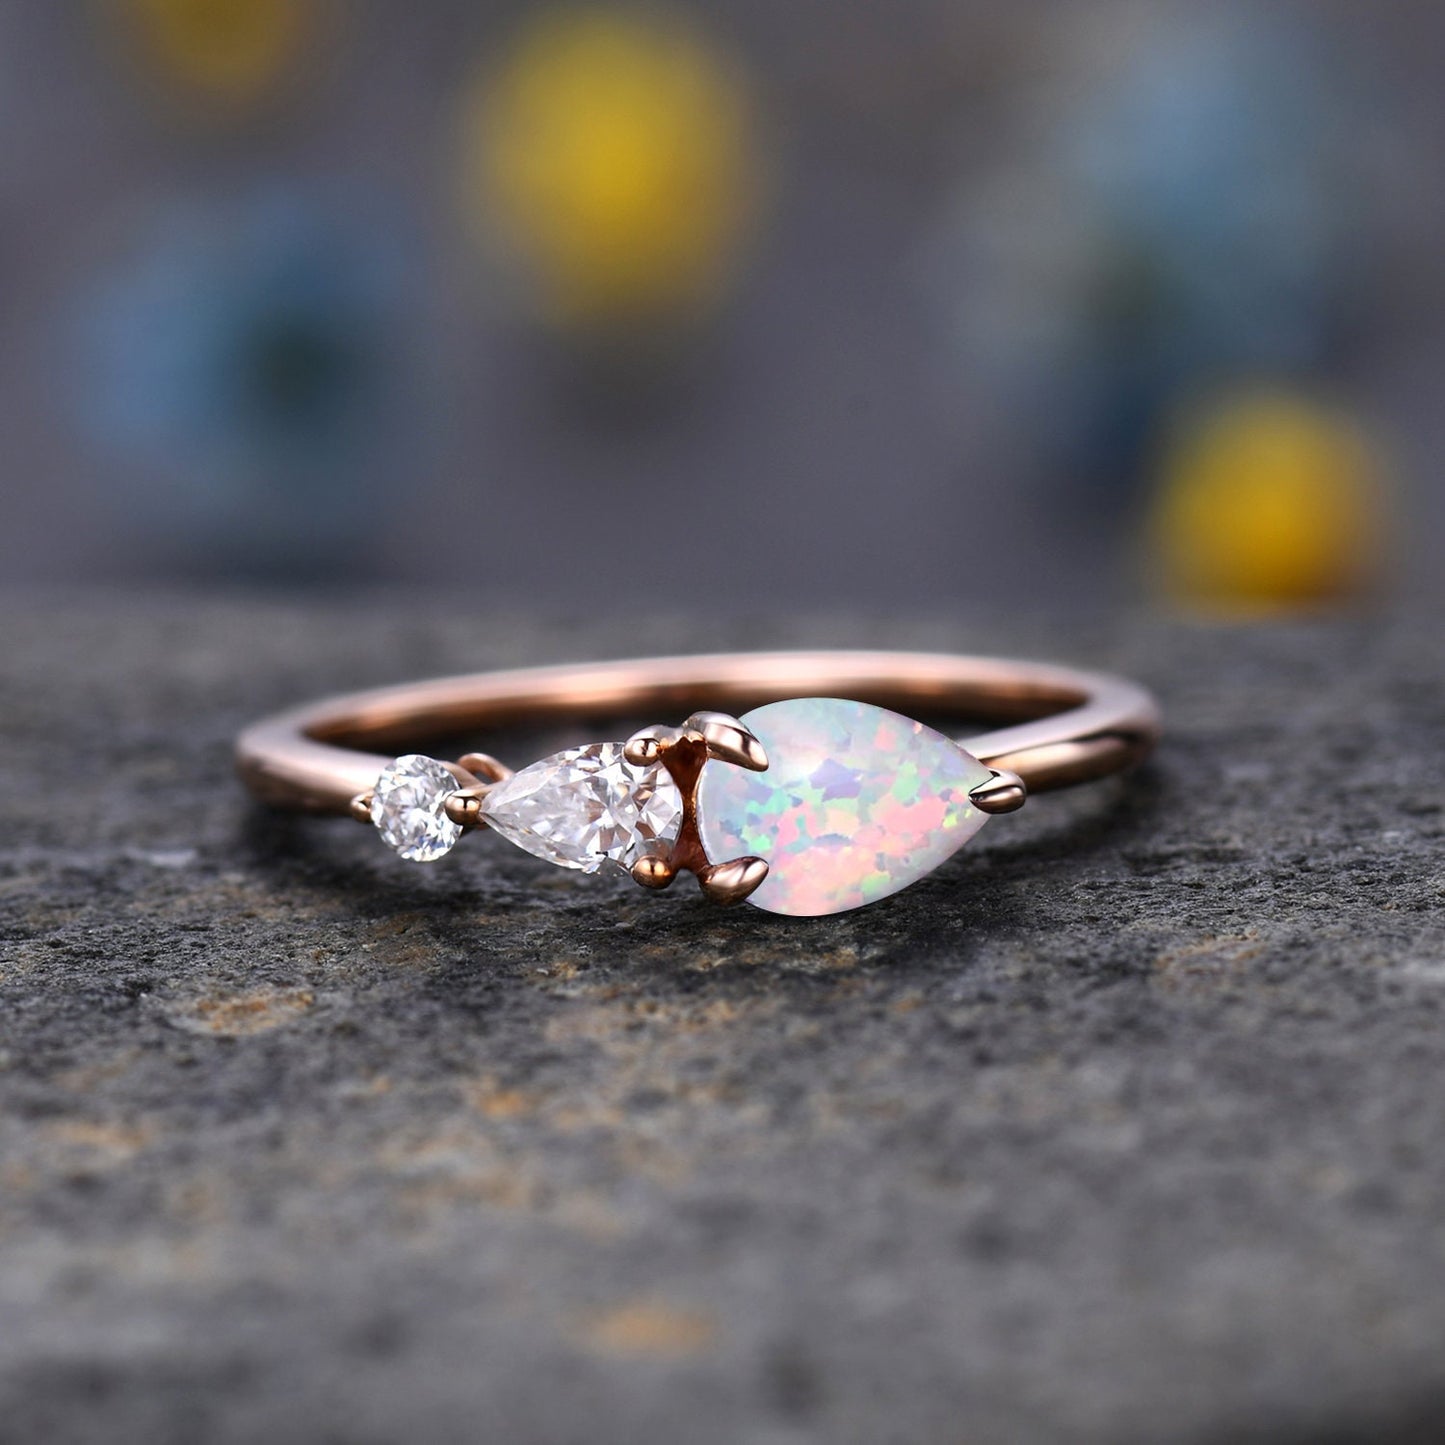 Vintage White Opal Engagement Ring,Pear Cut Gems,Art Deco Moissanite Wedding Band,3 Stone Unique Women Bridal Promise Ring,Rose gold ring